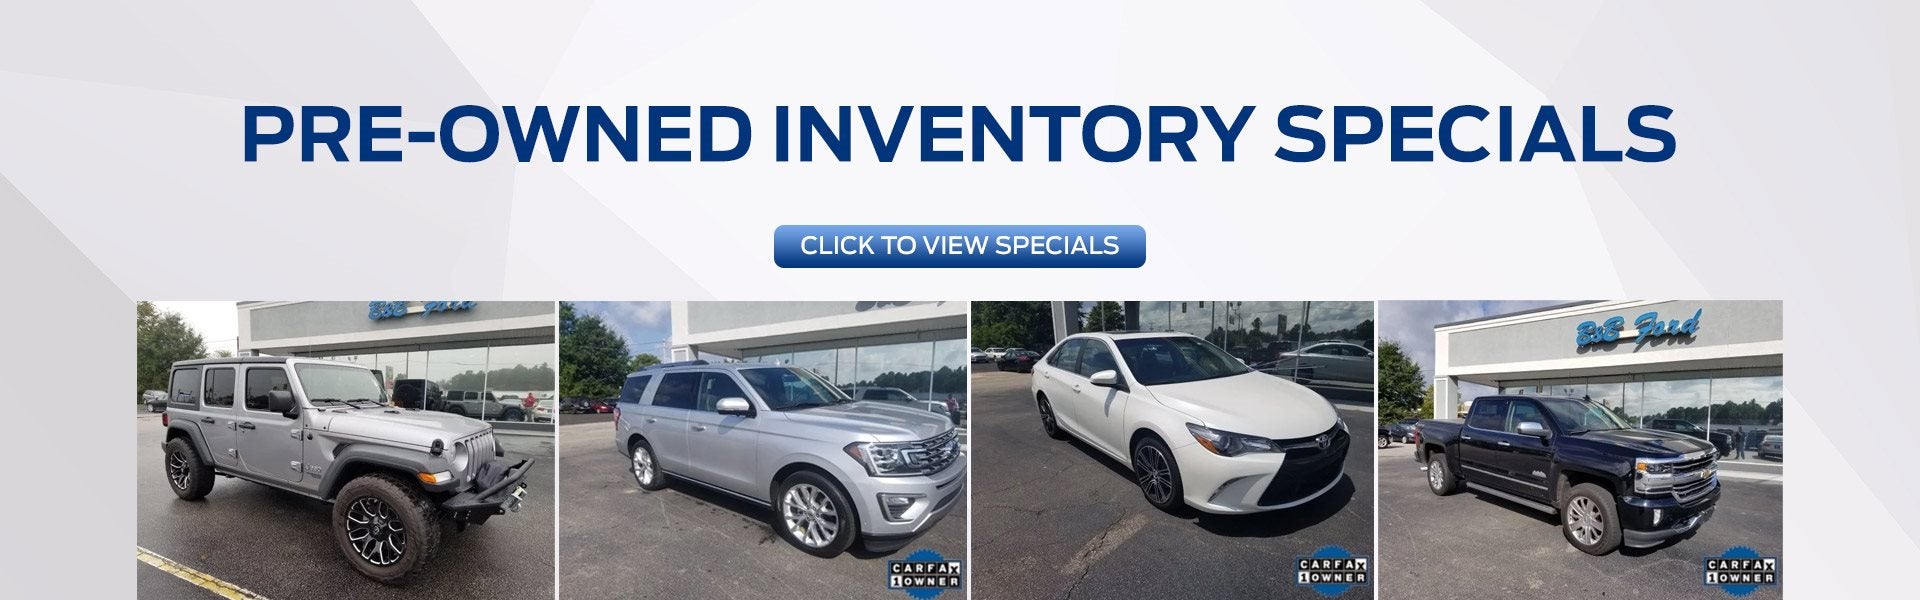 Pre-owned inventory Specials